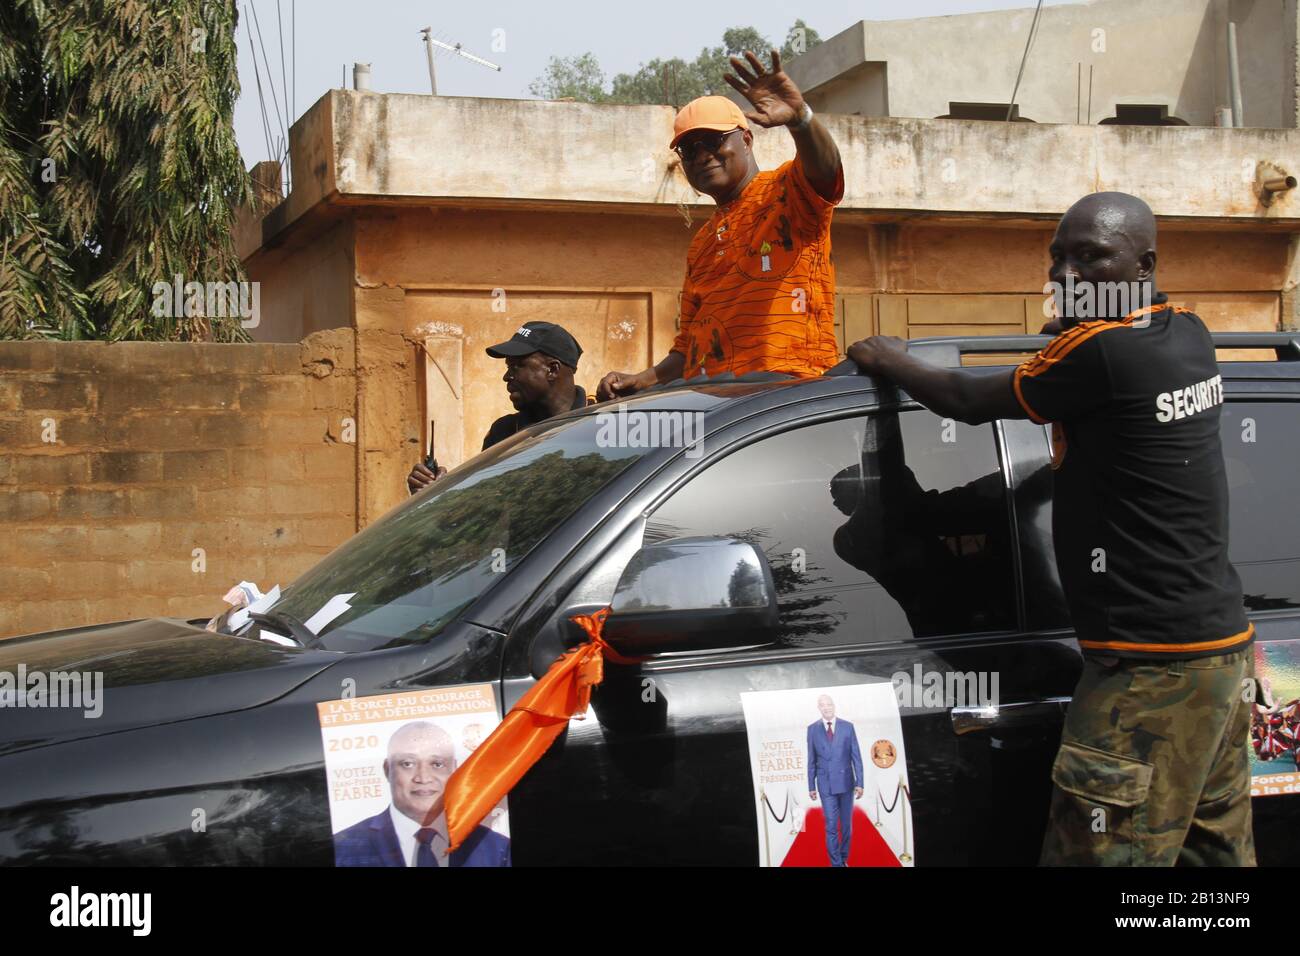 Lome, Togo. 20th Feb, 2020. Former leader of the opposition Jean-Pierre Fabre (C) waves to supporters in Lome, Togo, on Feb. 20, 2020. Togo's presidential election kicked off on Saturday at 7 a.m. local time (0700 GMT). Seven candidates, including the incumbent president Faure Gnassingbe, who has been in power since 2005 and is looking for a fourth term, compete for presidency. Credit: Xiao Jiuyang/Xinhua/Alamy Live News Stock Photo